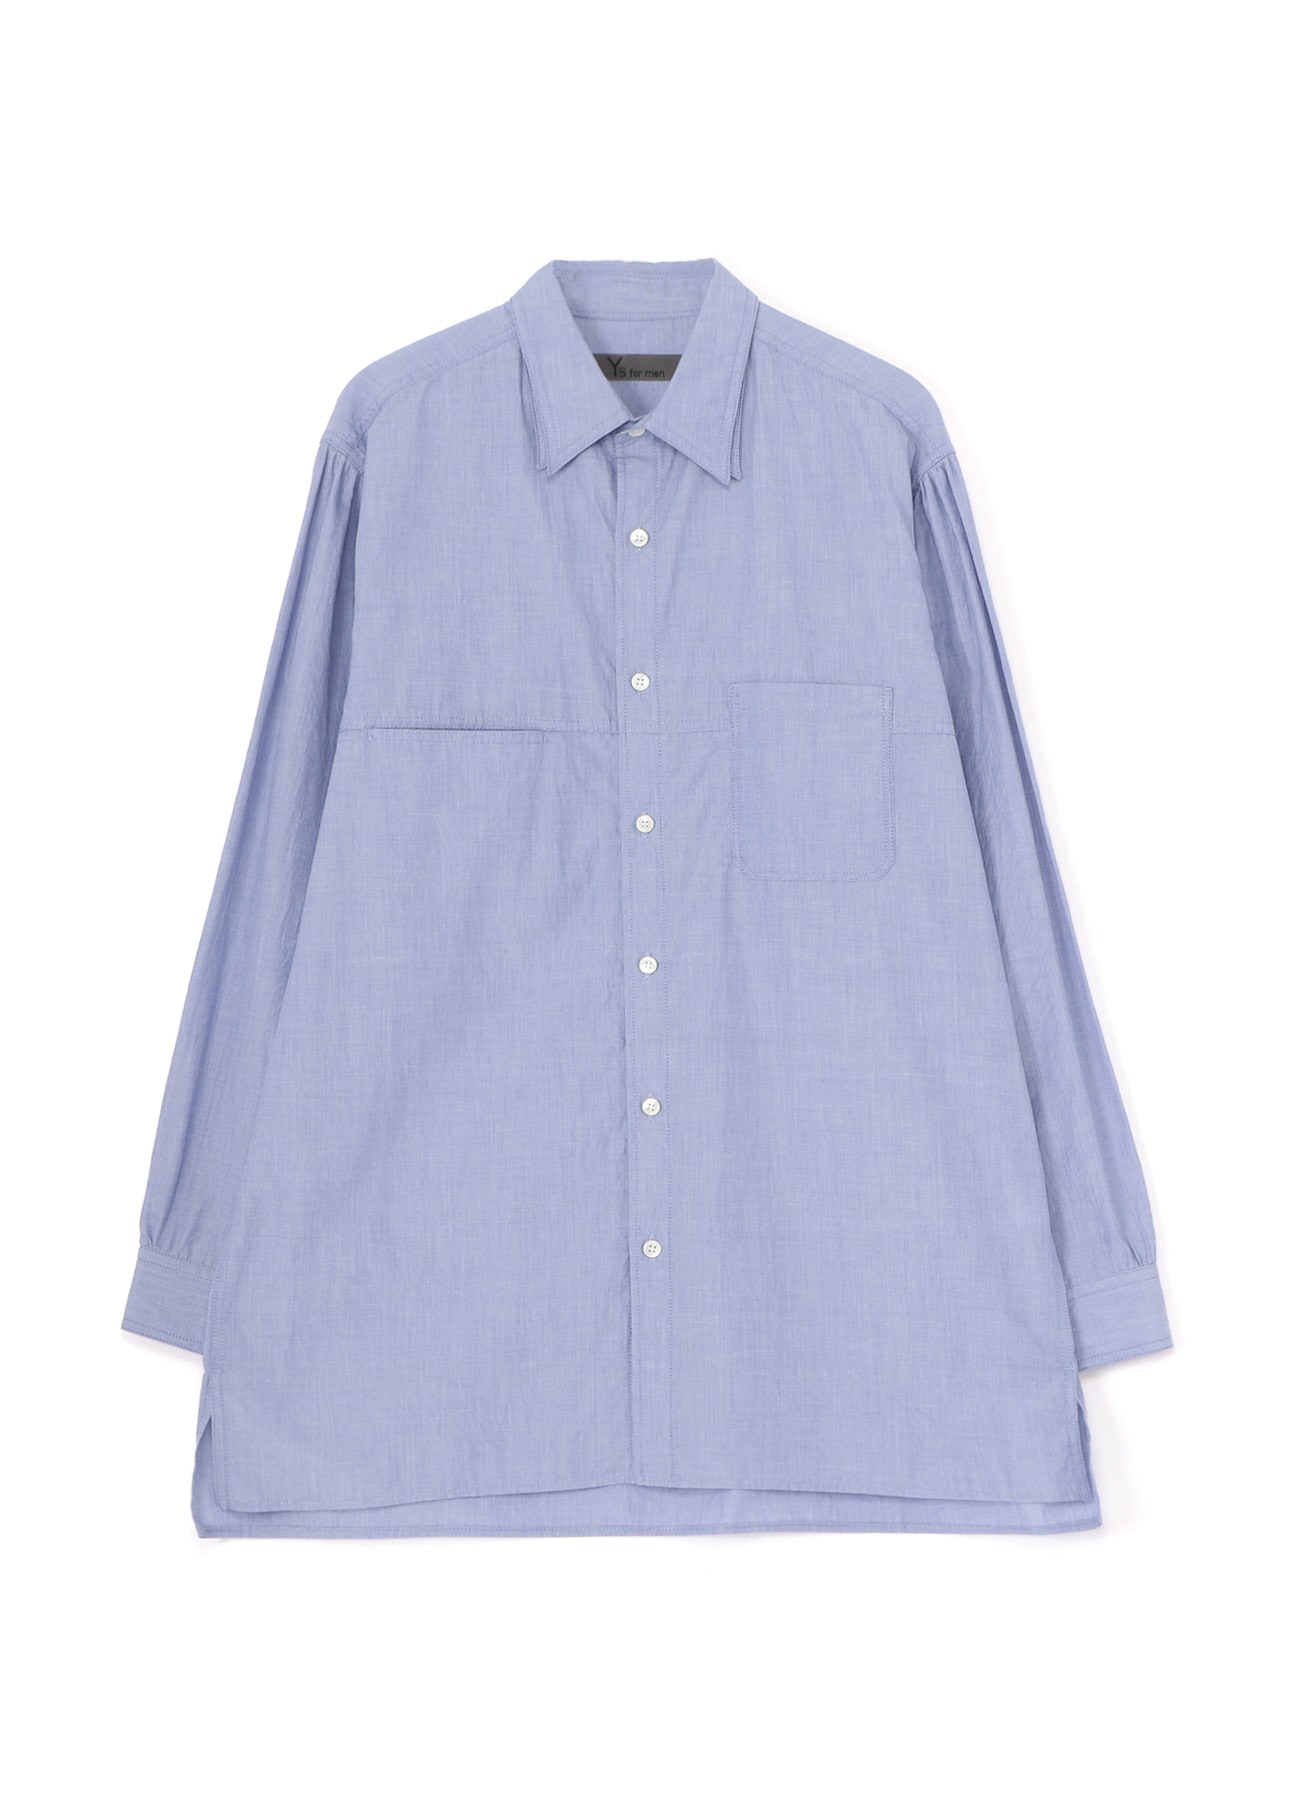 CHAIN STITCHED SHIRT WITH DOUBLE COLLAR(S Blue): Y's for men｜THE 